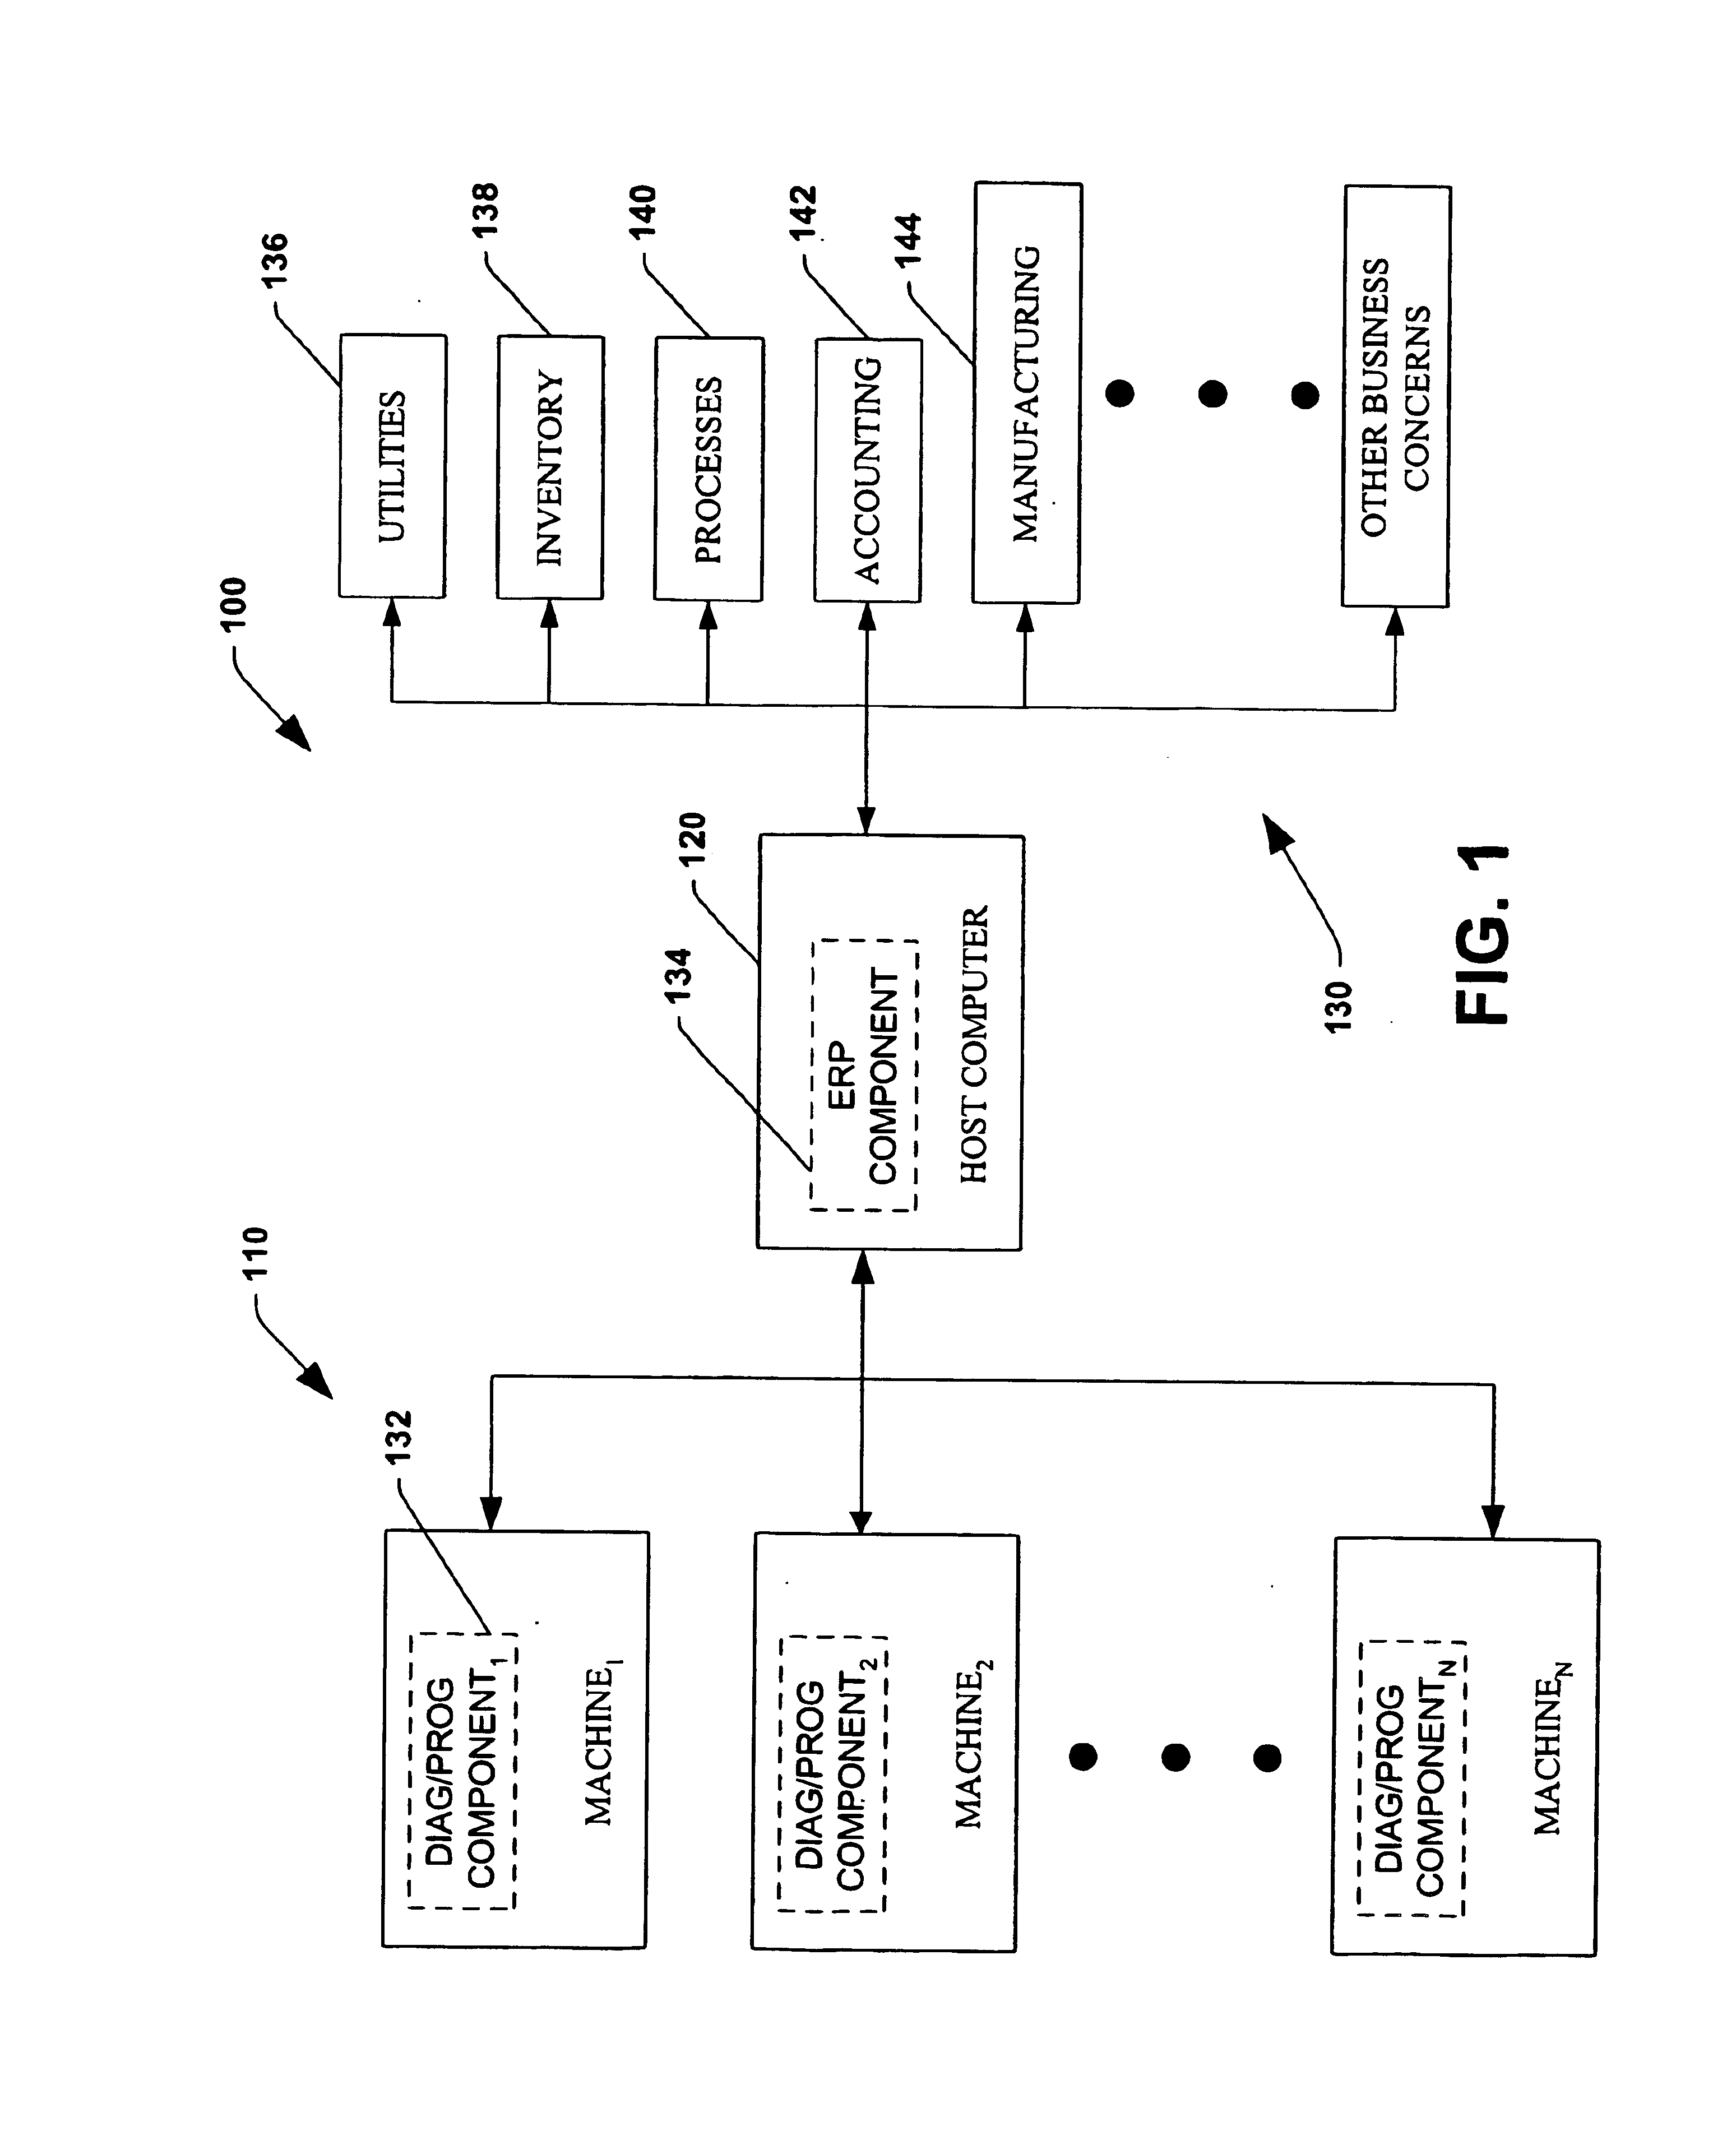 System and method for dynamic multi-objective optimization of machine selection, integration and utilization